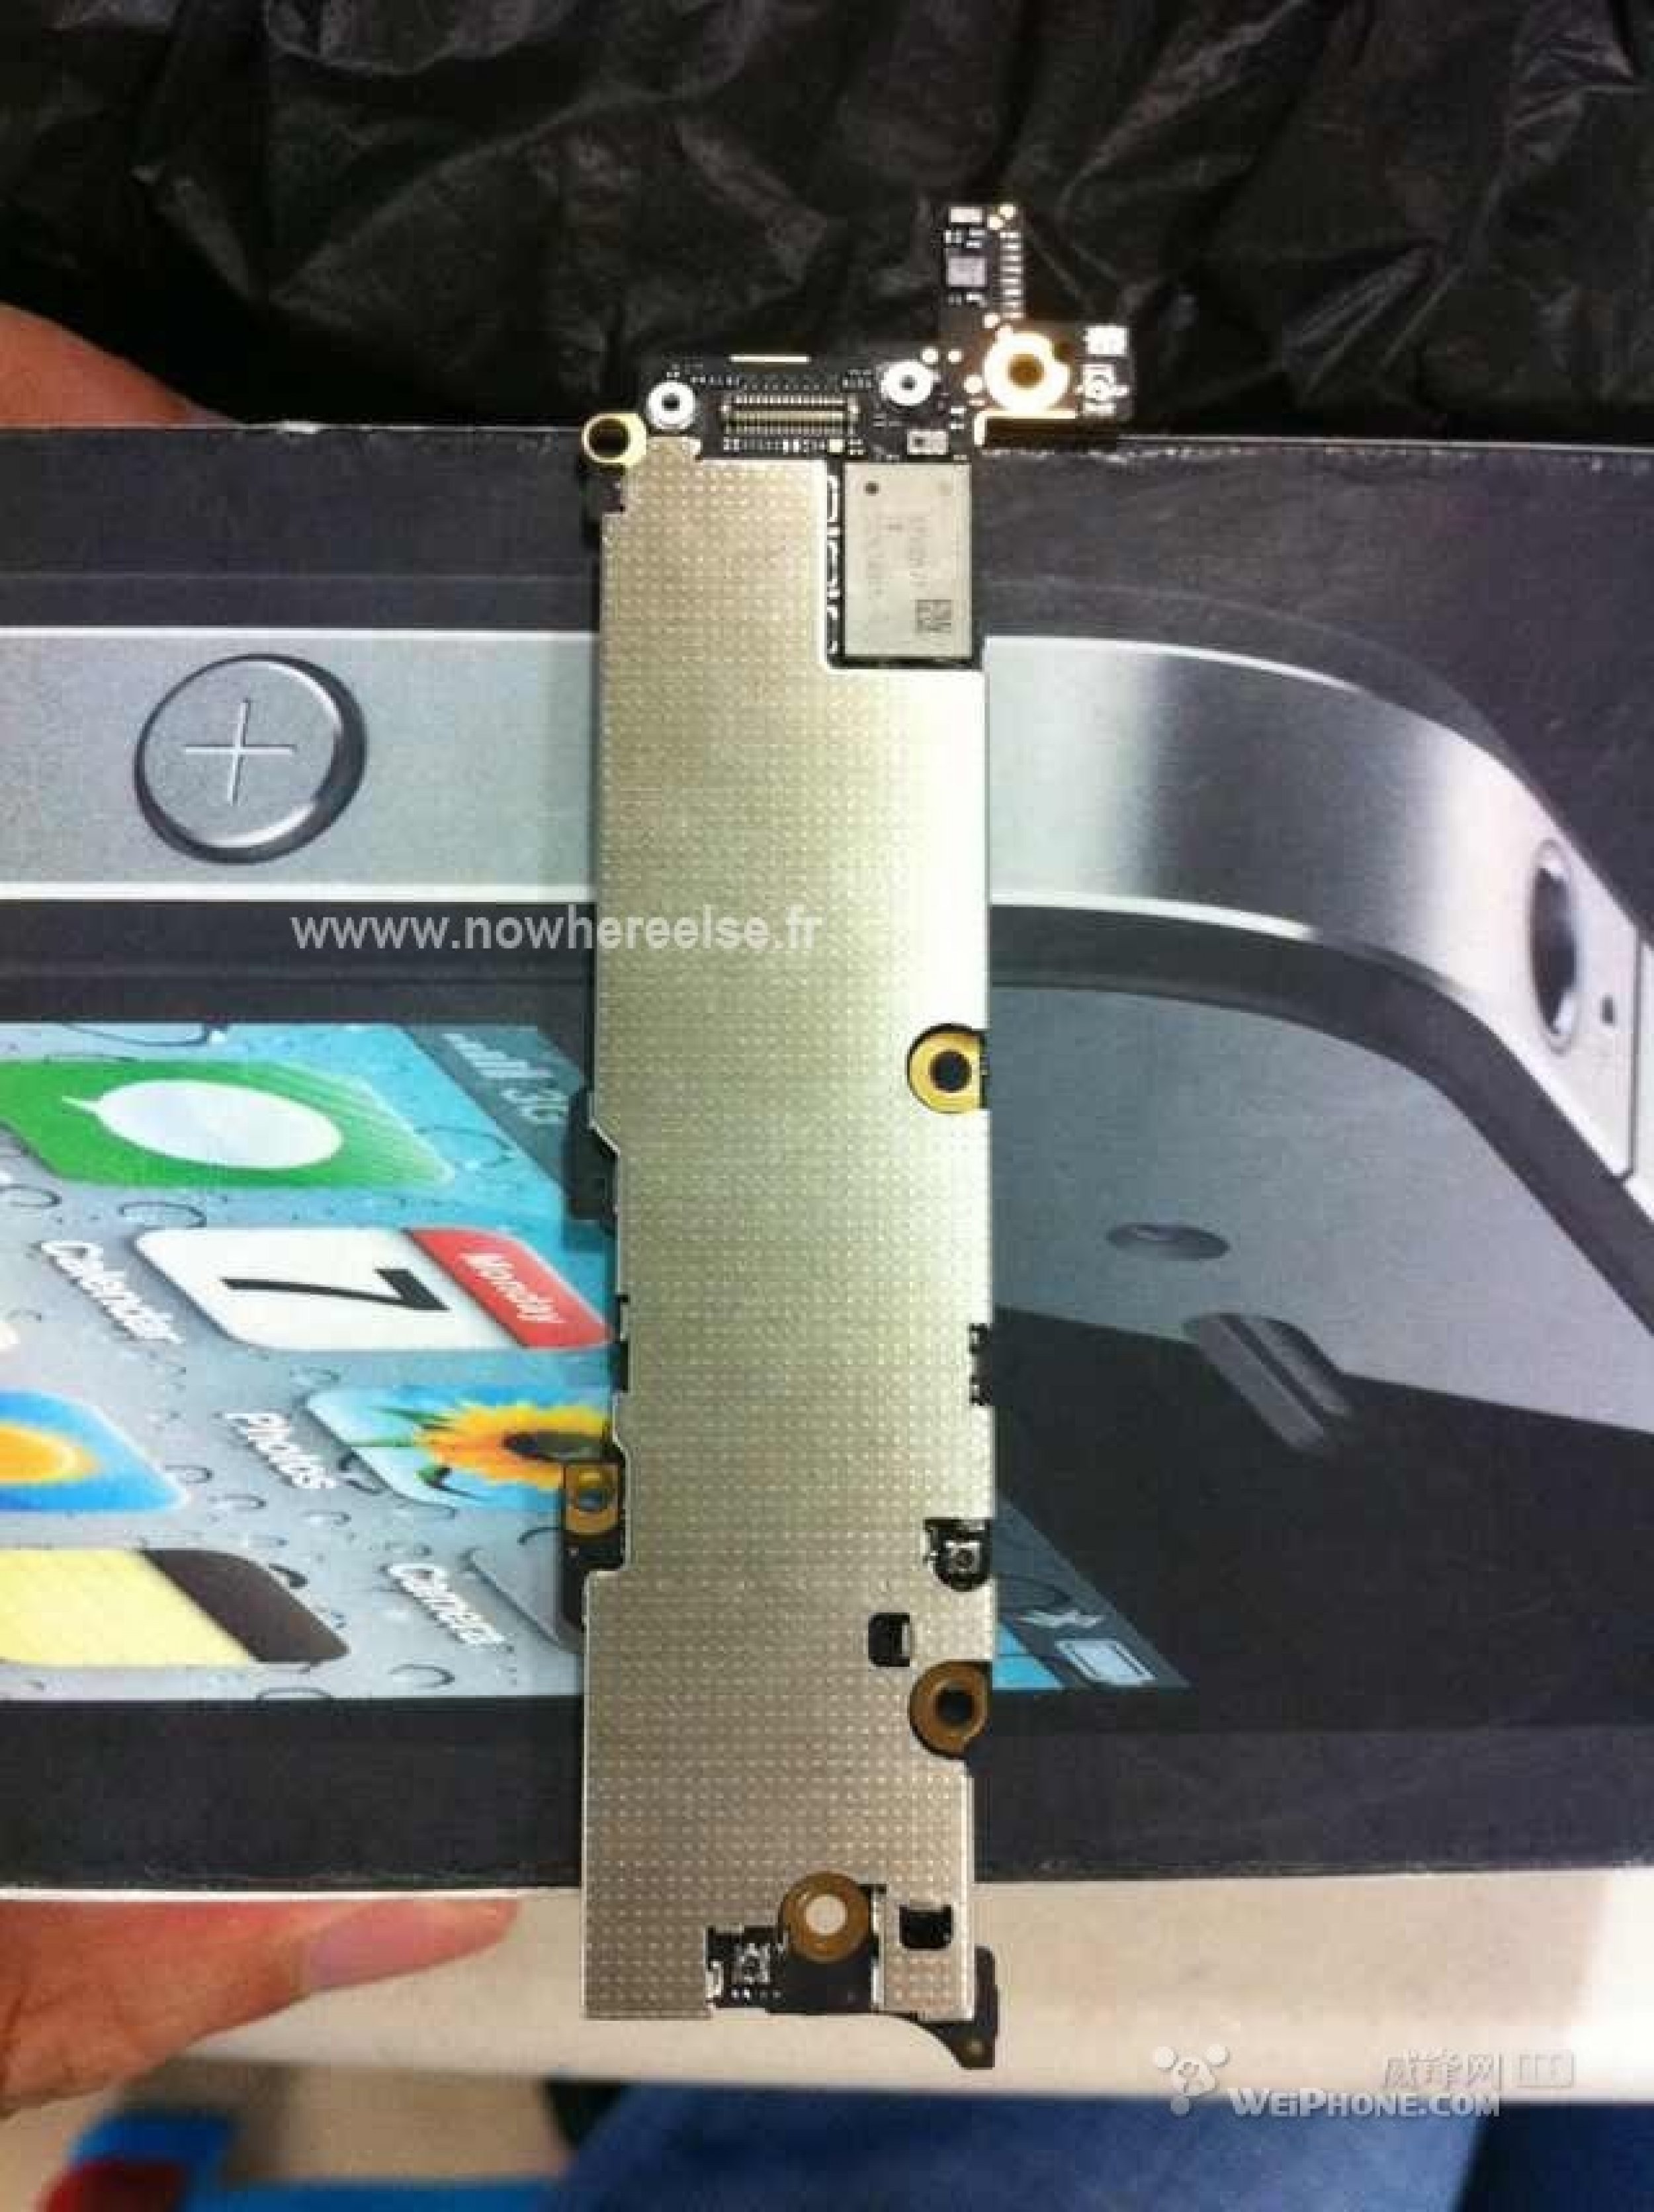 Apple iPhone 5 Features Logic Board Perfectly Fits Previous Specs Rumors, Components PICTURES